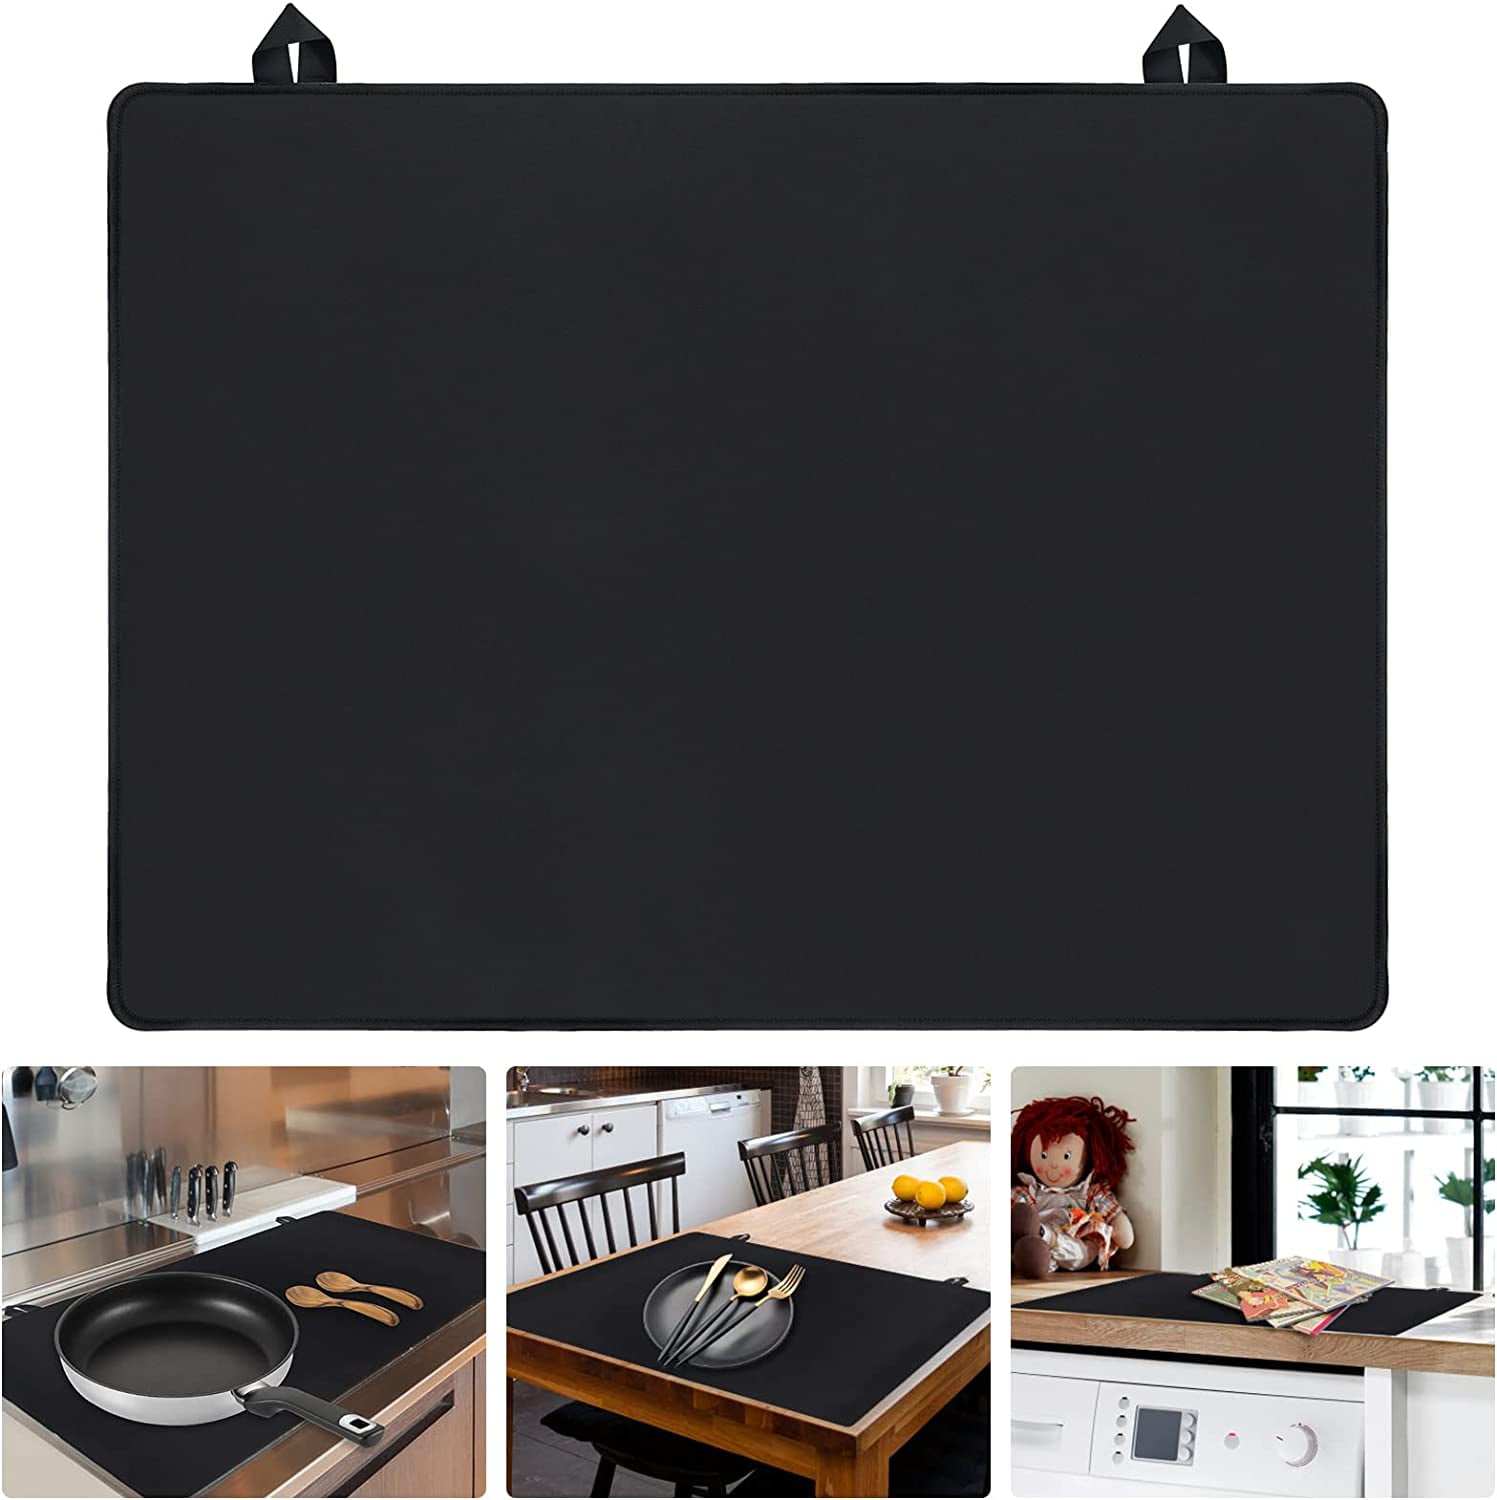  Stove Top Cover for Electric Stove, 20.5x28.5in Electric Stove  Cover, Glass Top Stove Cover, Ceramic Glass Cooktop Protector, Full Stove  Covers for Electric Stovetop, Flat Top Oven Cover : Appliances